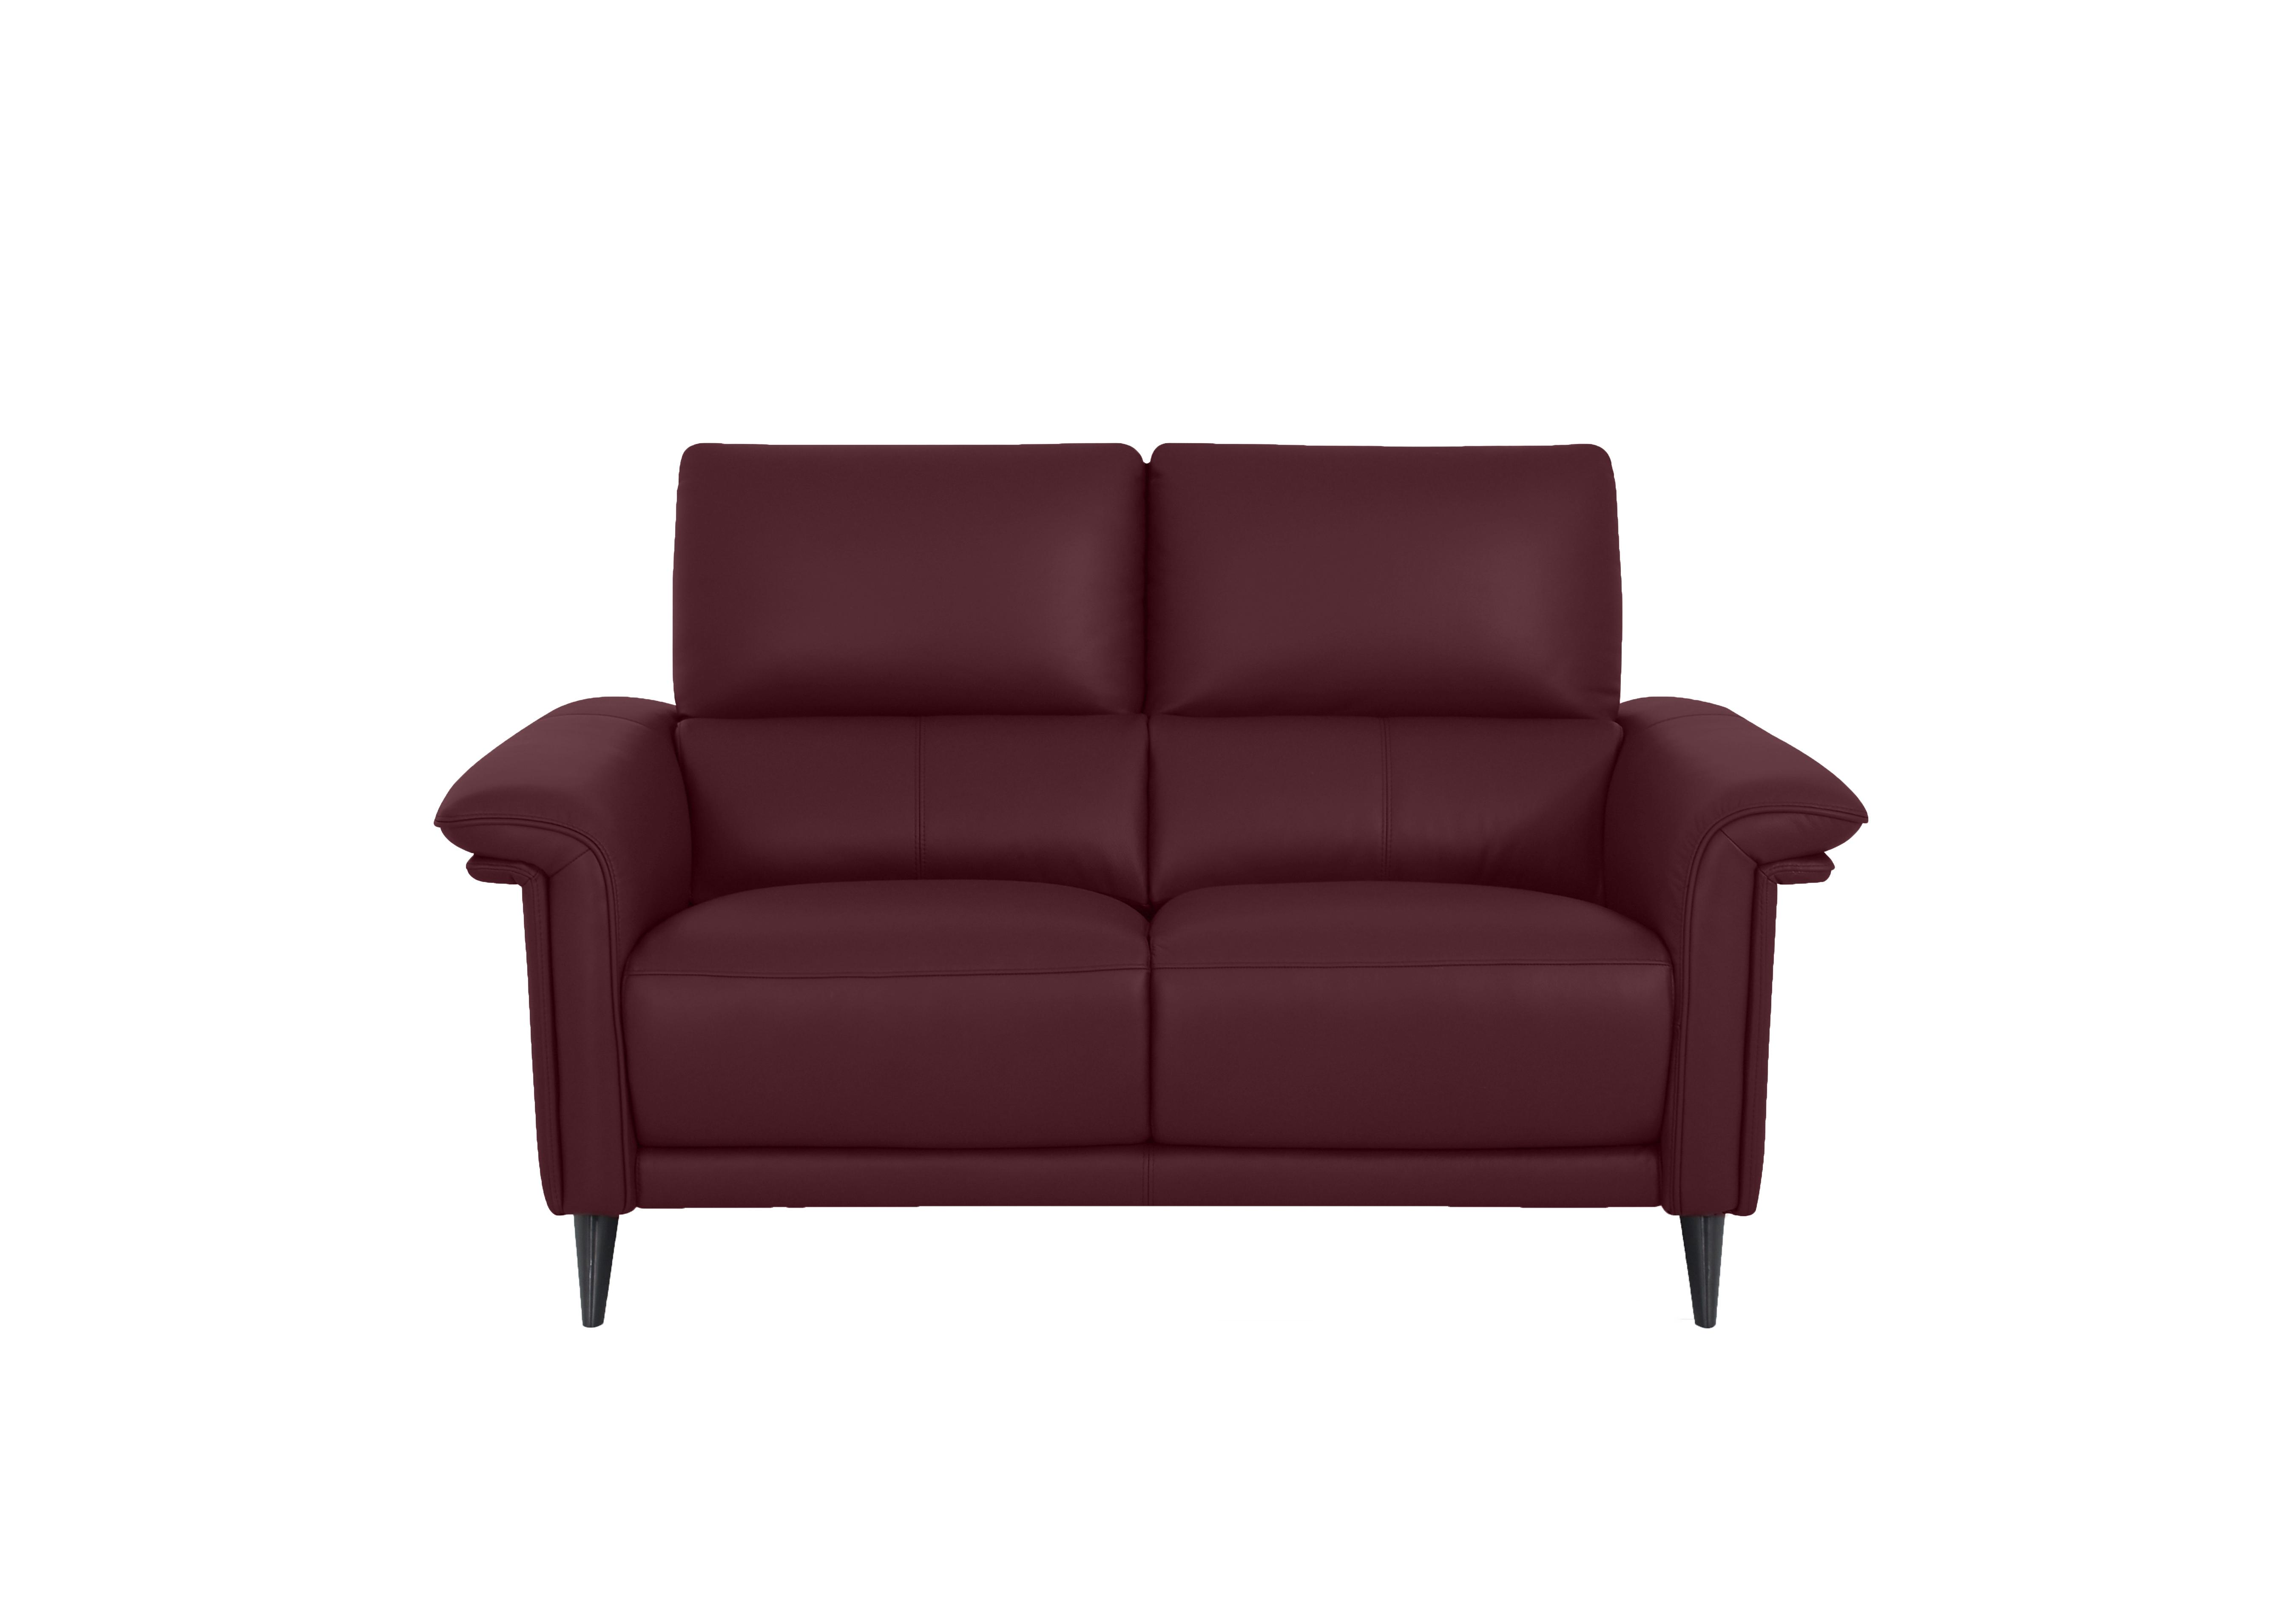 Huxley 2 Seater Leather Sofa in Np-549e Ruby on Furniture Village